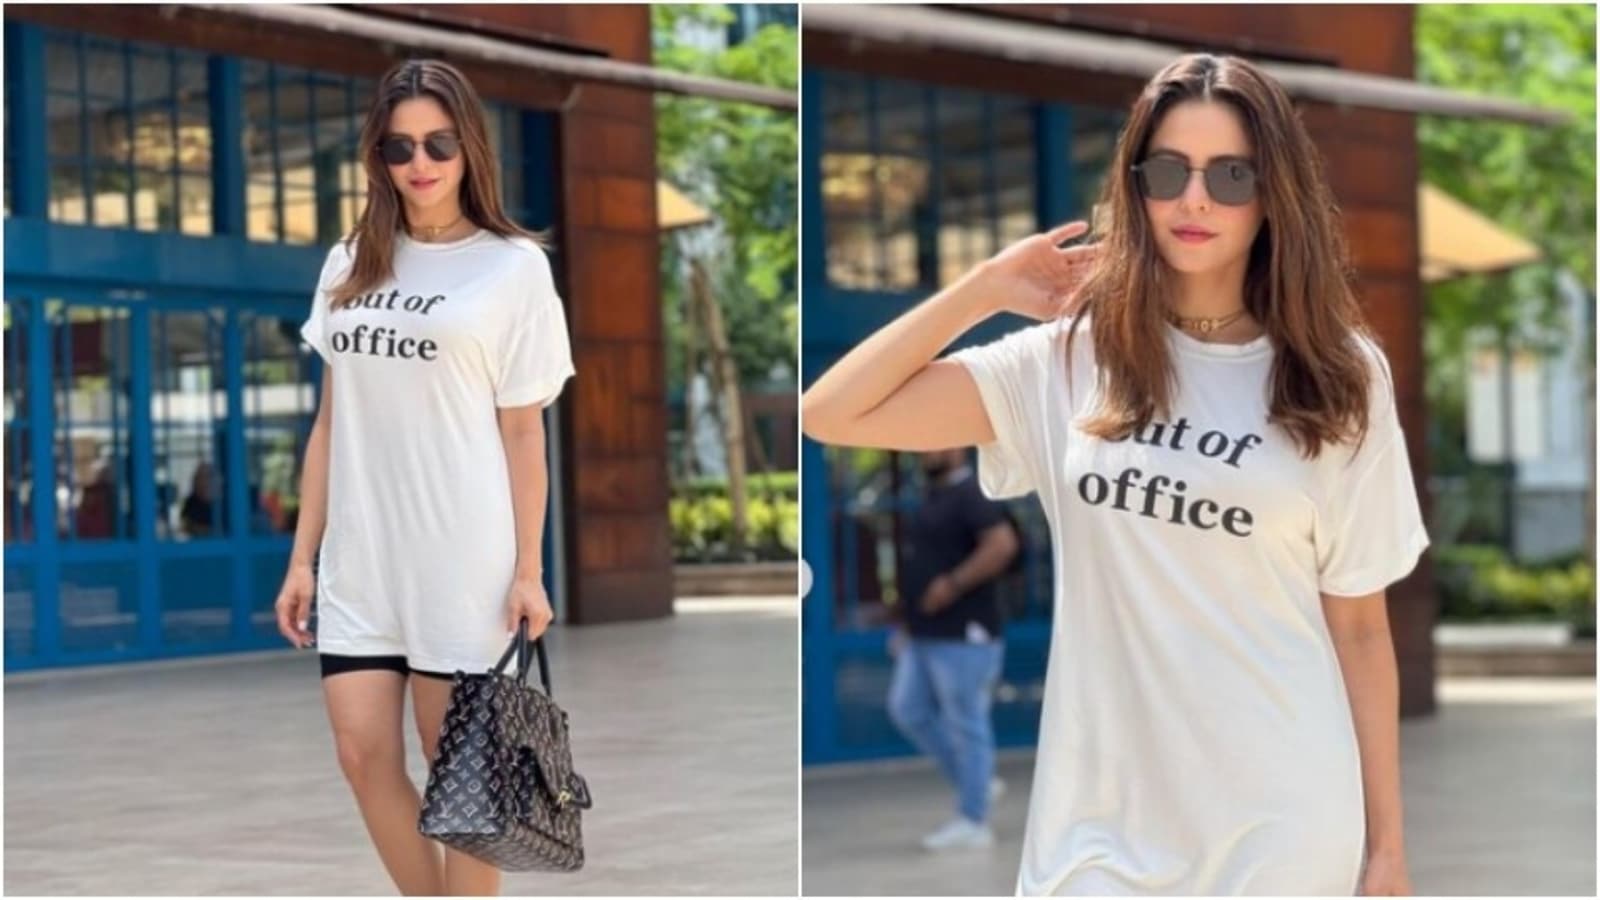 Aamna Sharif is ‘out of office’ in a casual attire. Check pics